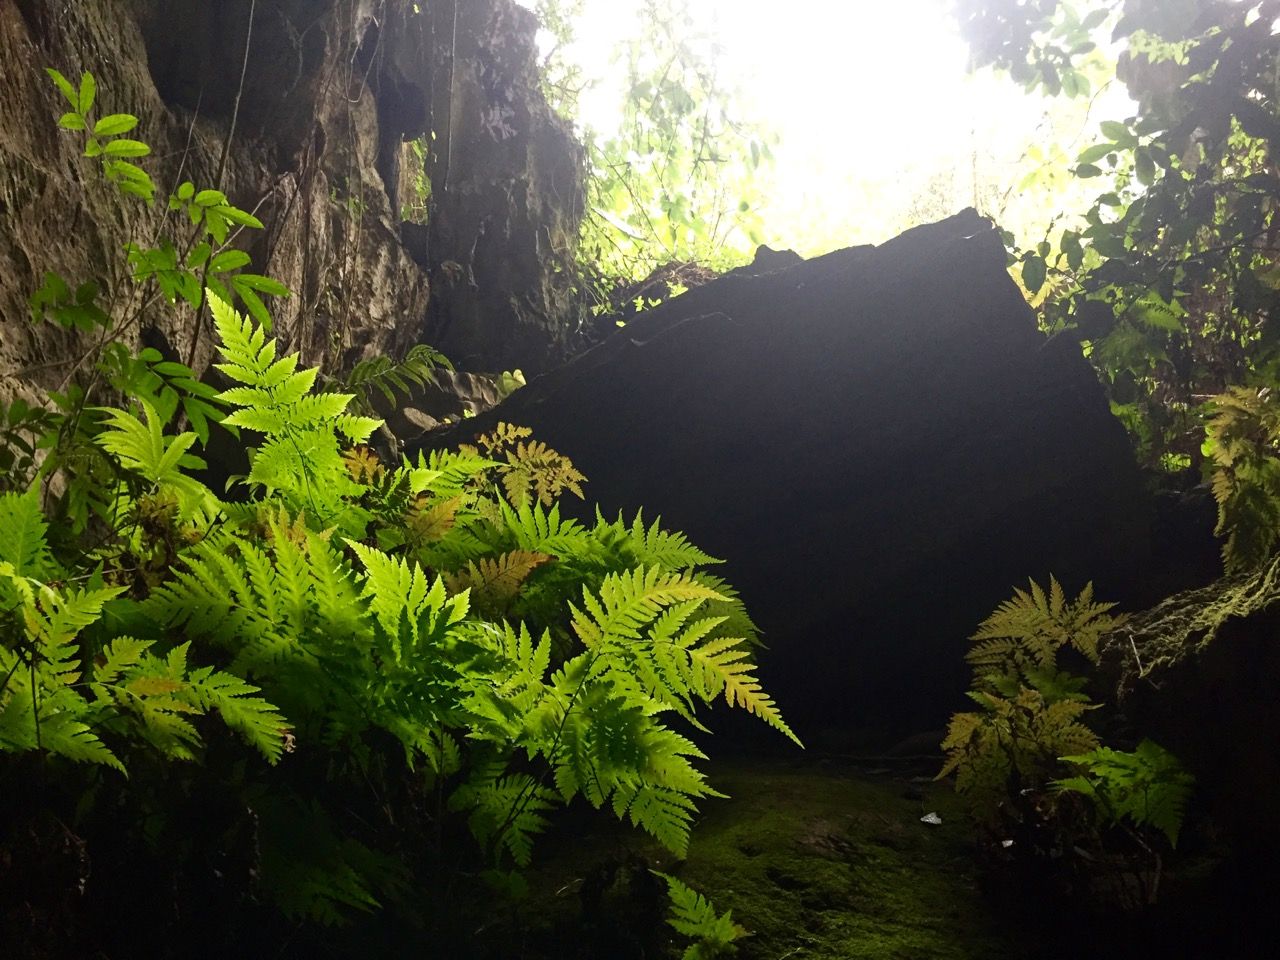 Ferns in a cave lit by the sun.